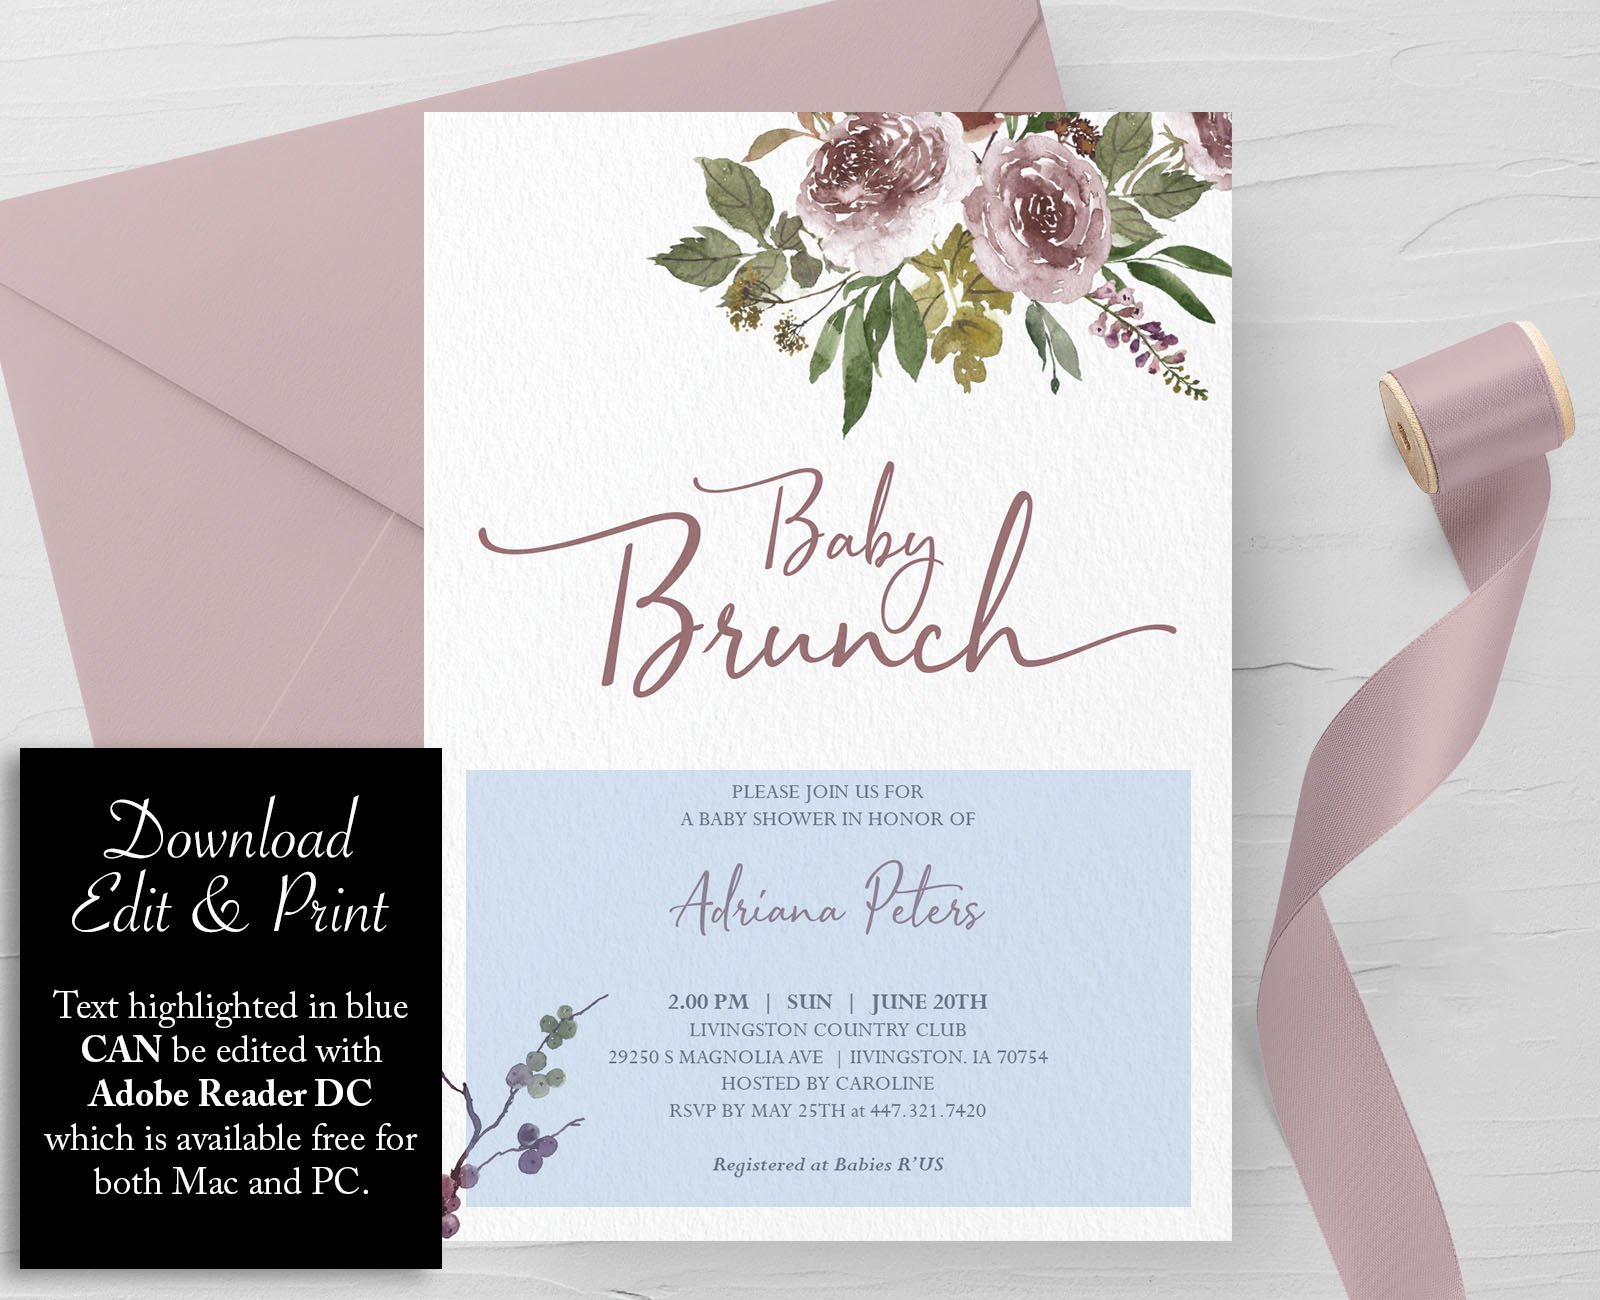 Baby Brunch Shower Invitation preview image.